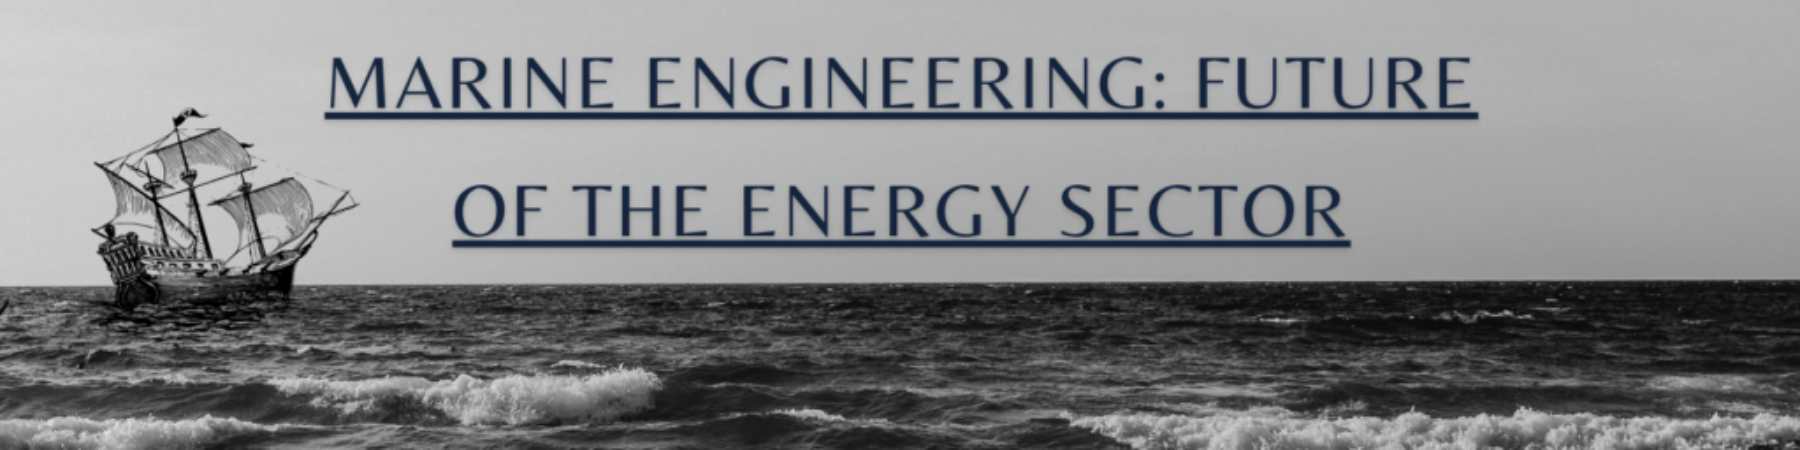 Marine Engineering_ Future of the Energy Sector